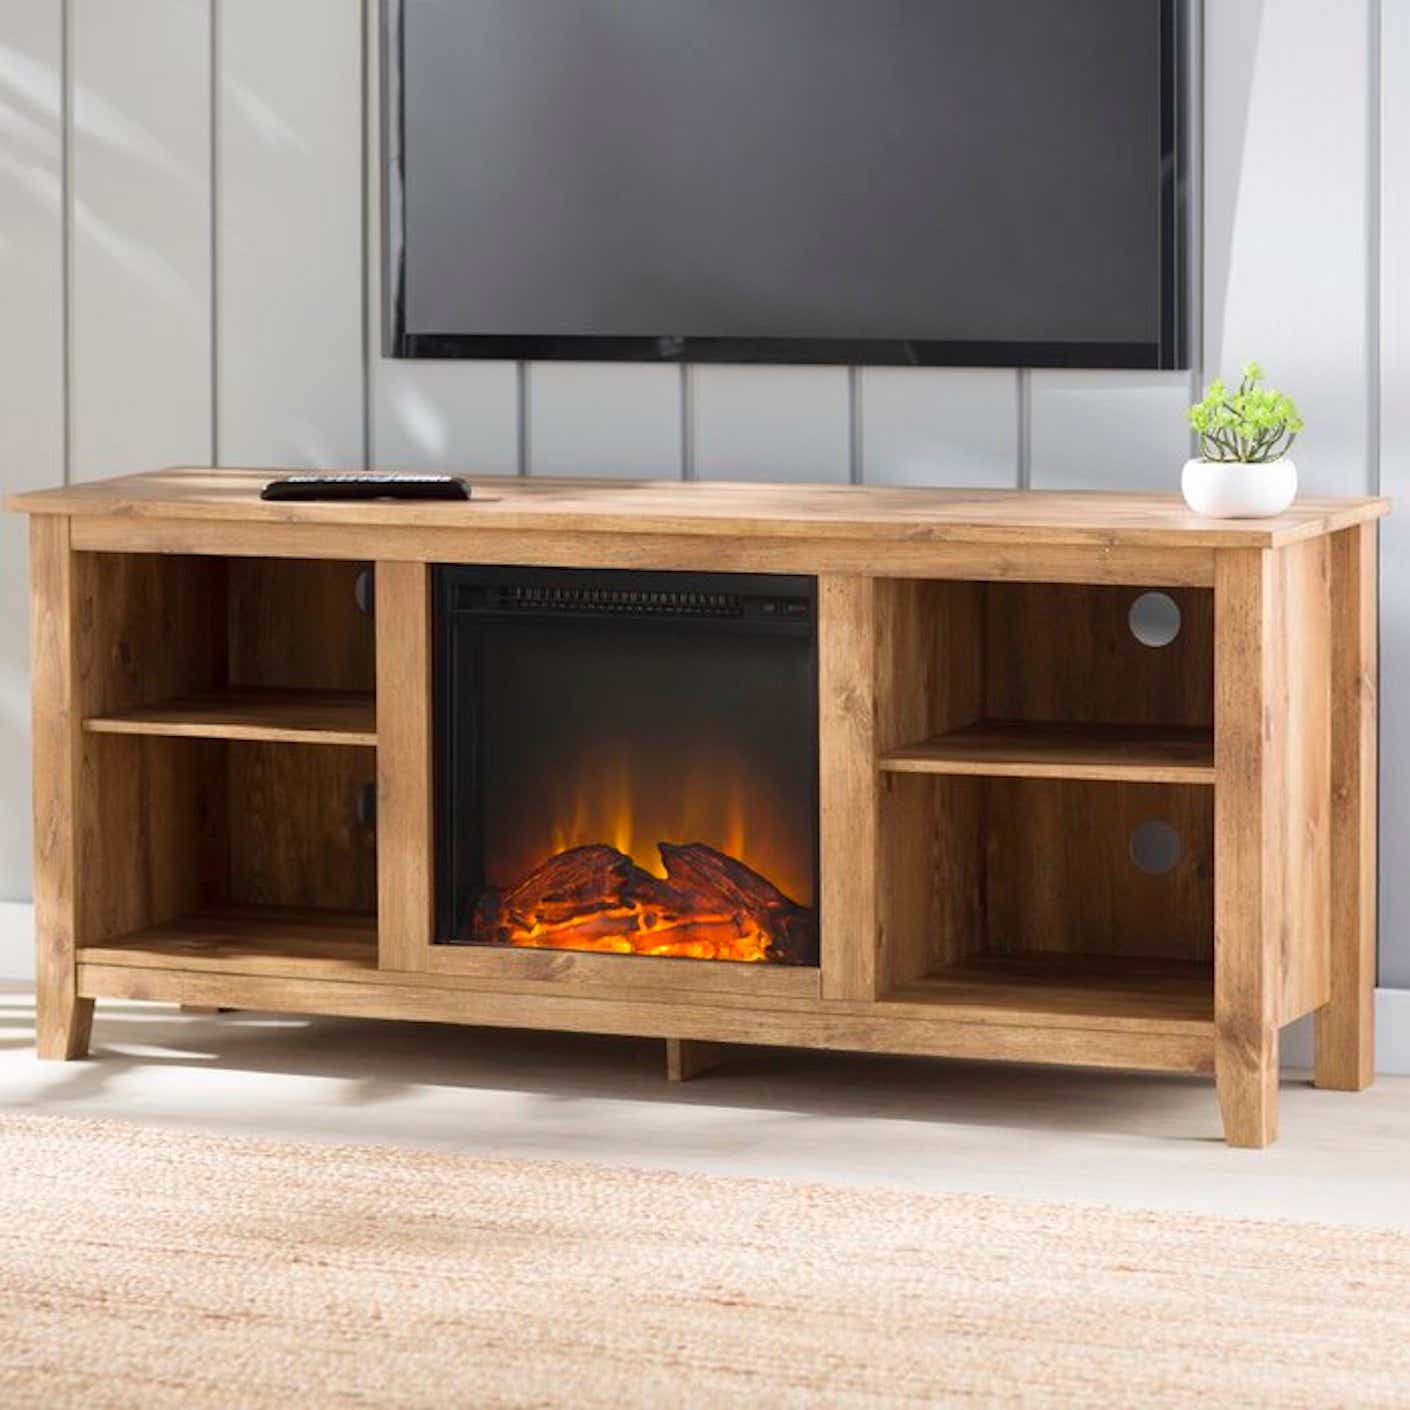 A wooden entertainment center with built-in electric fireplace sits beneath a mounted television.